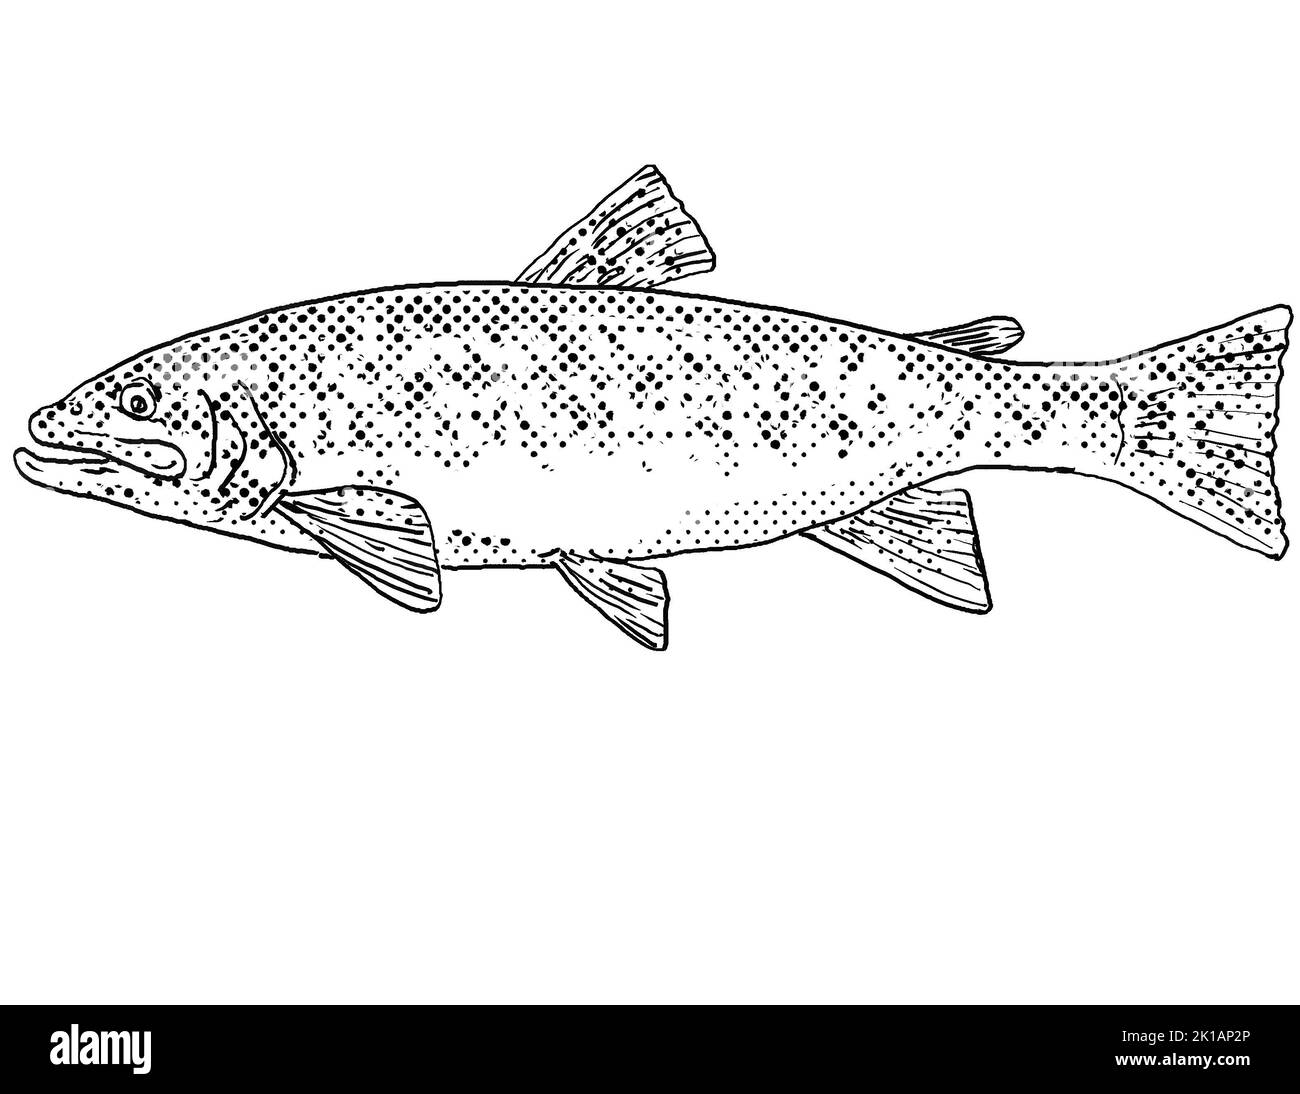 Cartoon style line drawing of a brook trout or Salvelinus fontinalis  a freshwater fish endemic to North America with halftone dots shading on isolate Stock Photo